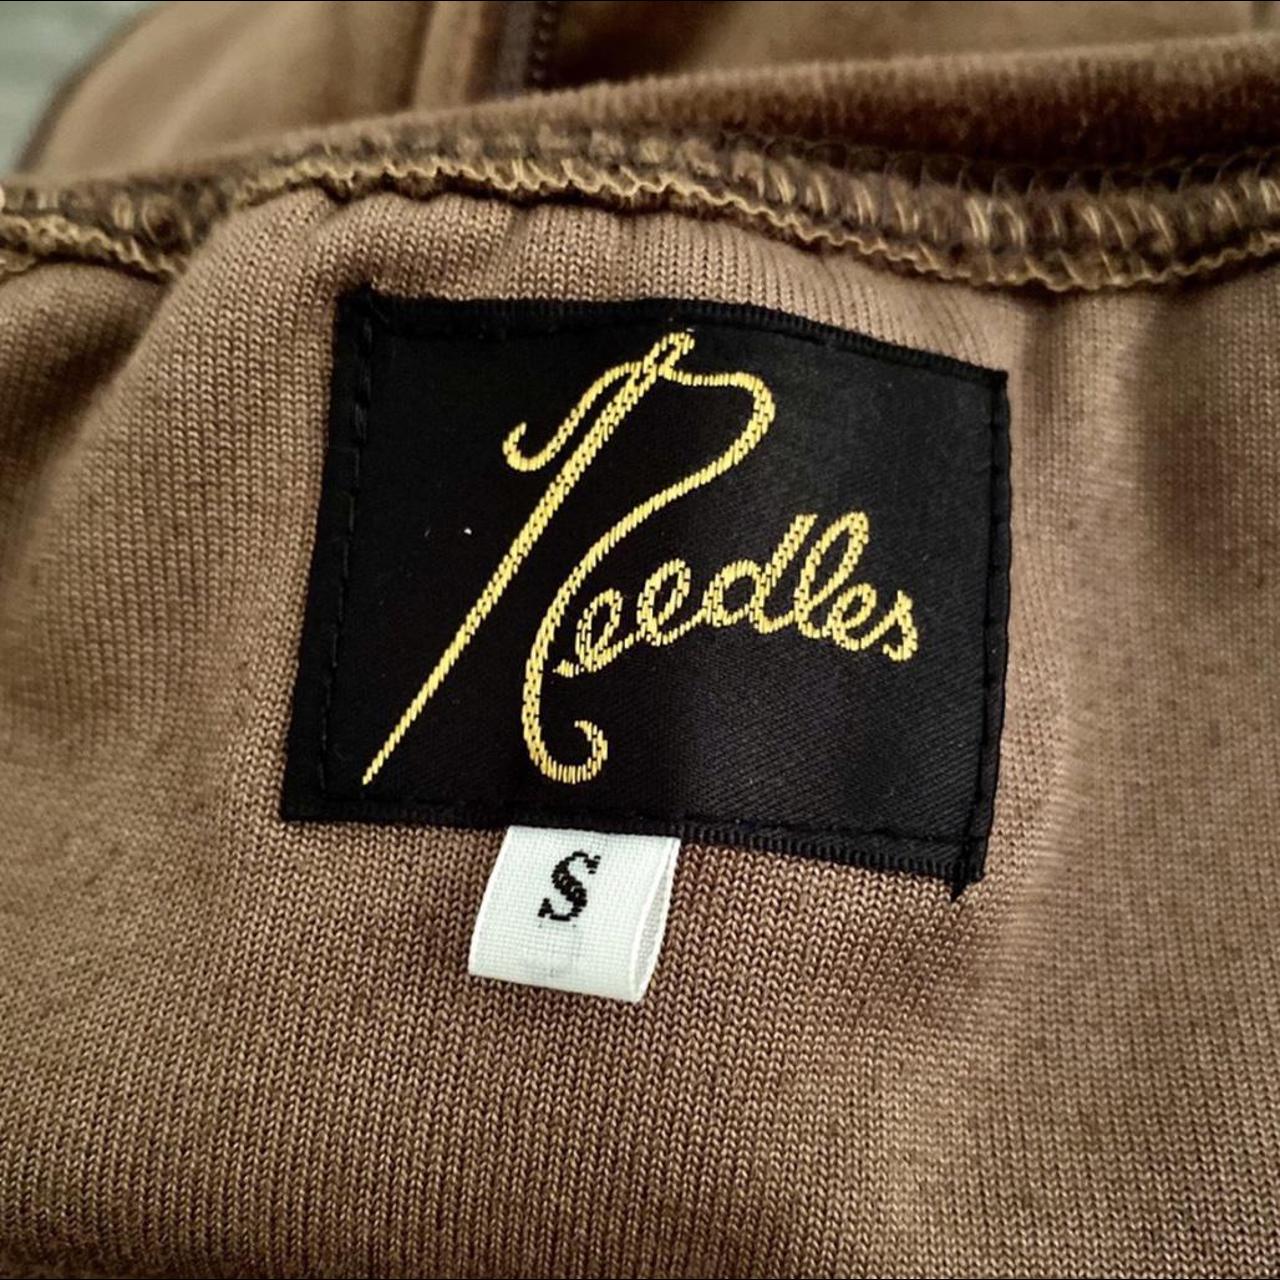 Needles Men's Brown and Gold Jacket (4)